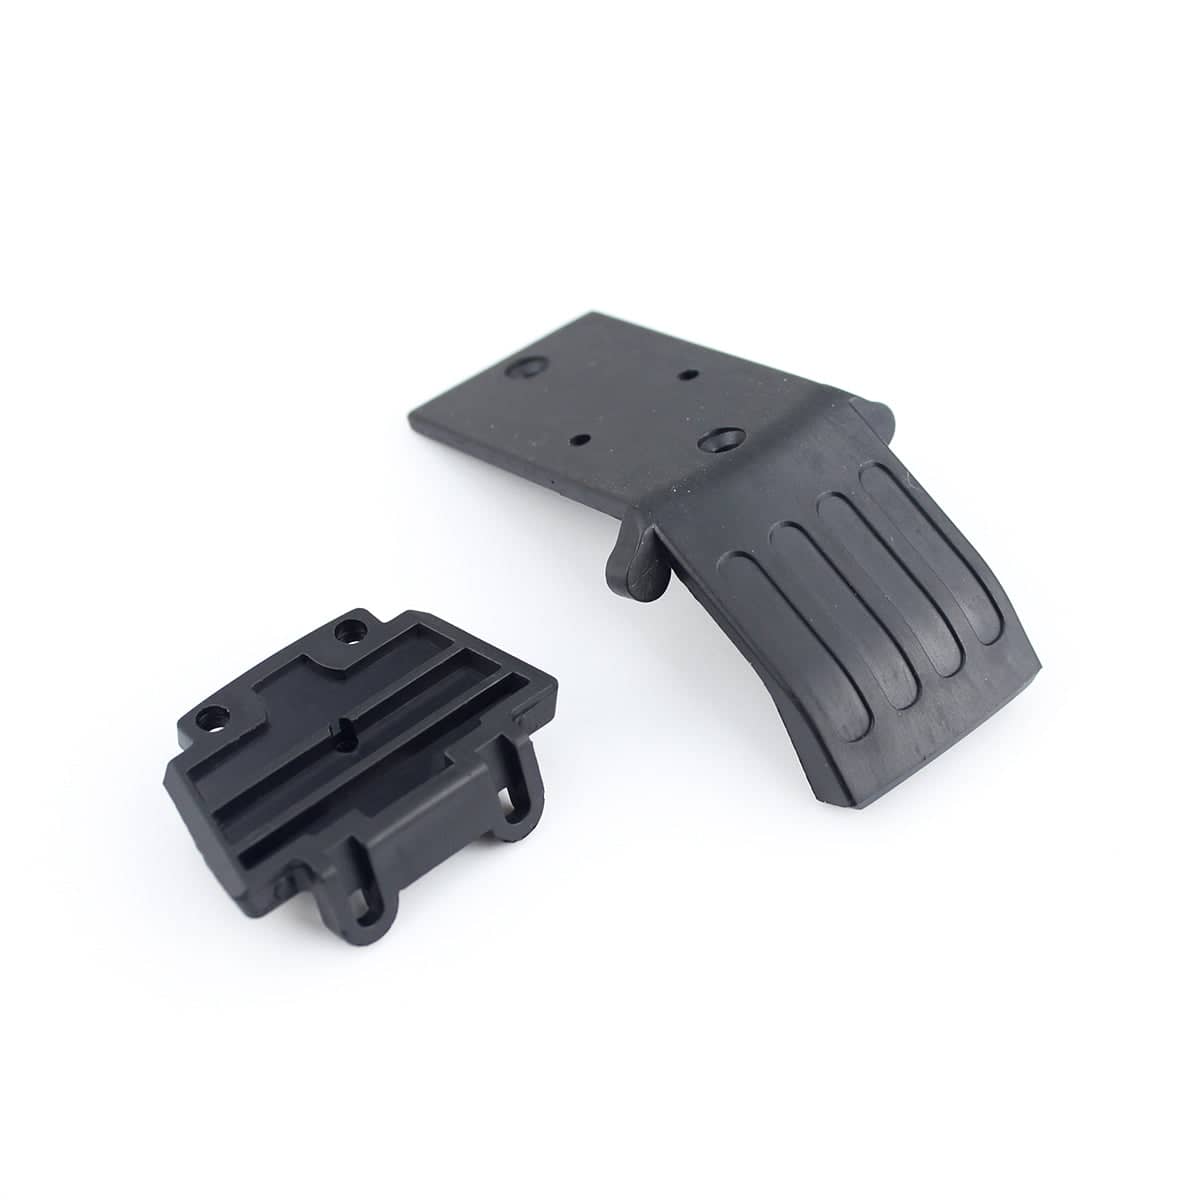 RC Car Front and Rear Collision AvoidanceParts 71-008 for G171 G172 G173 G174